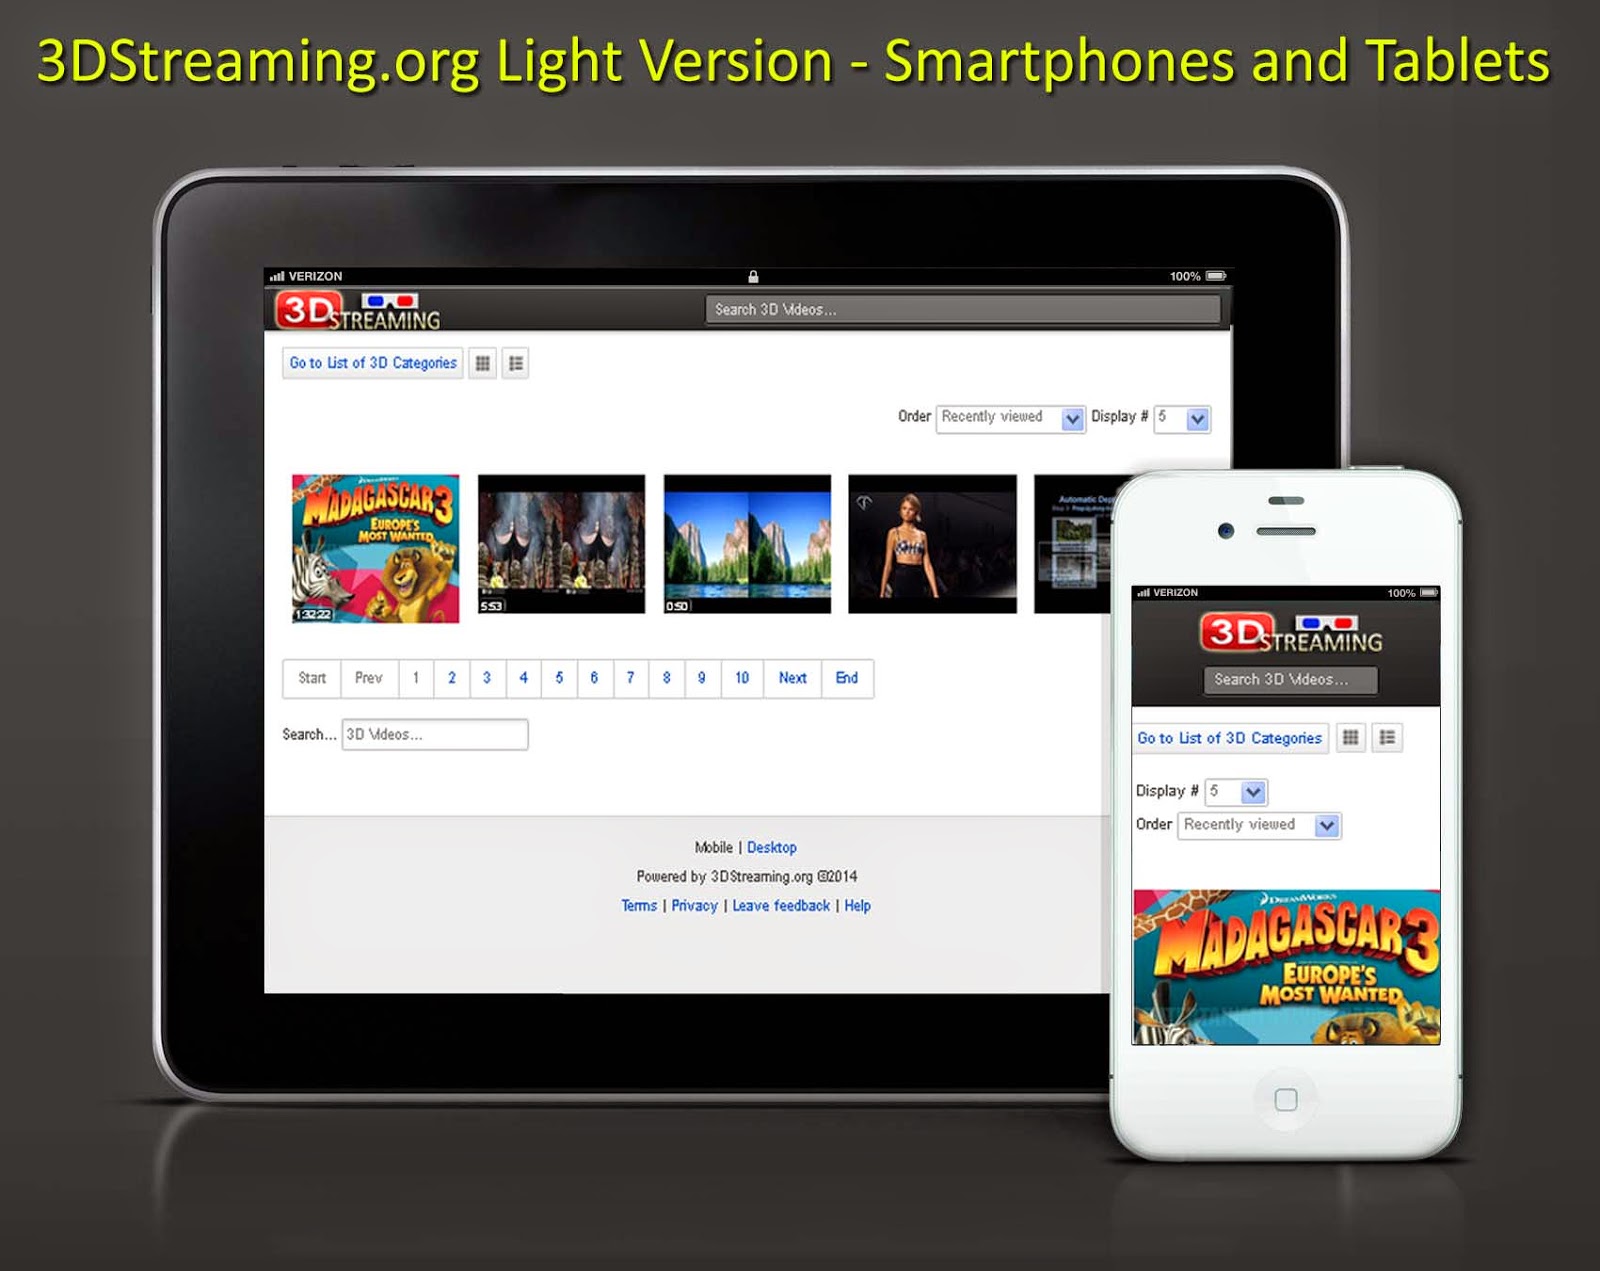 http://www.3dstreaming.org/forum/3dnews-smartphone/468-3dstreaming-light-version-for-smarphones-and-tablets.html